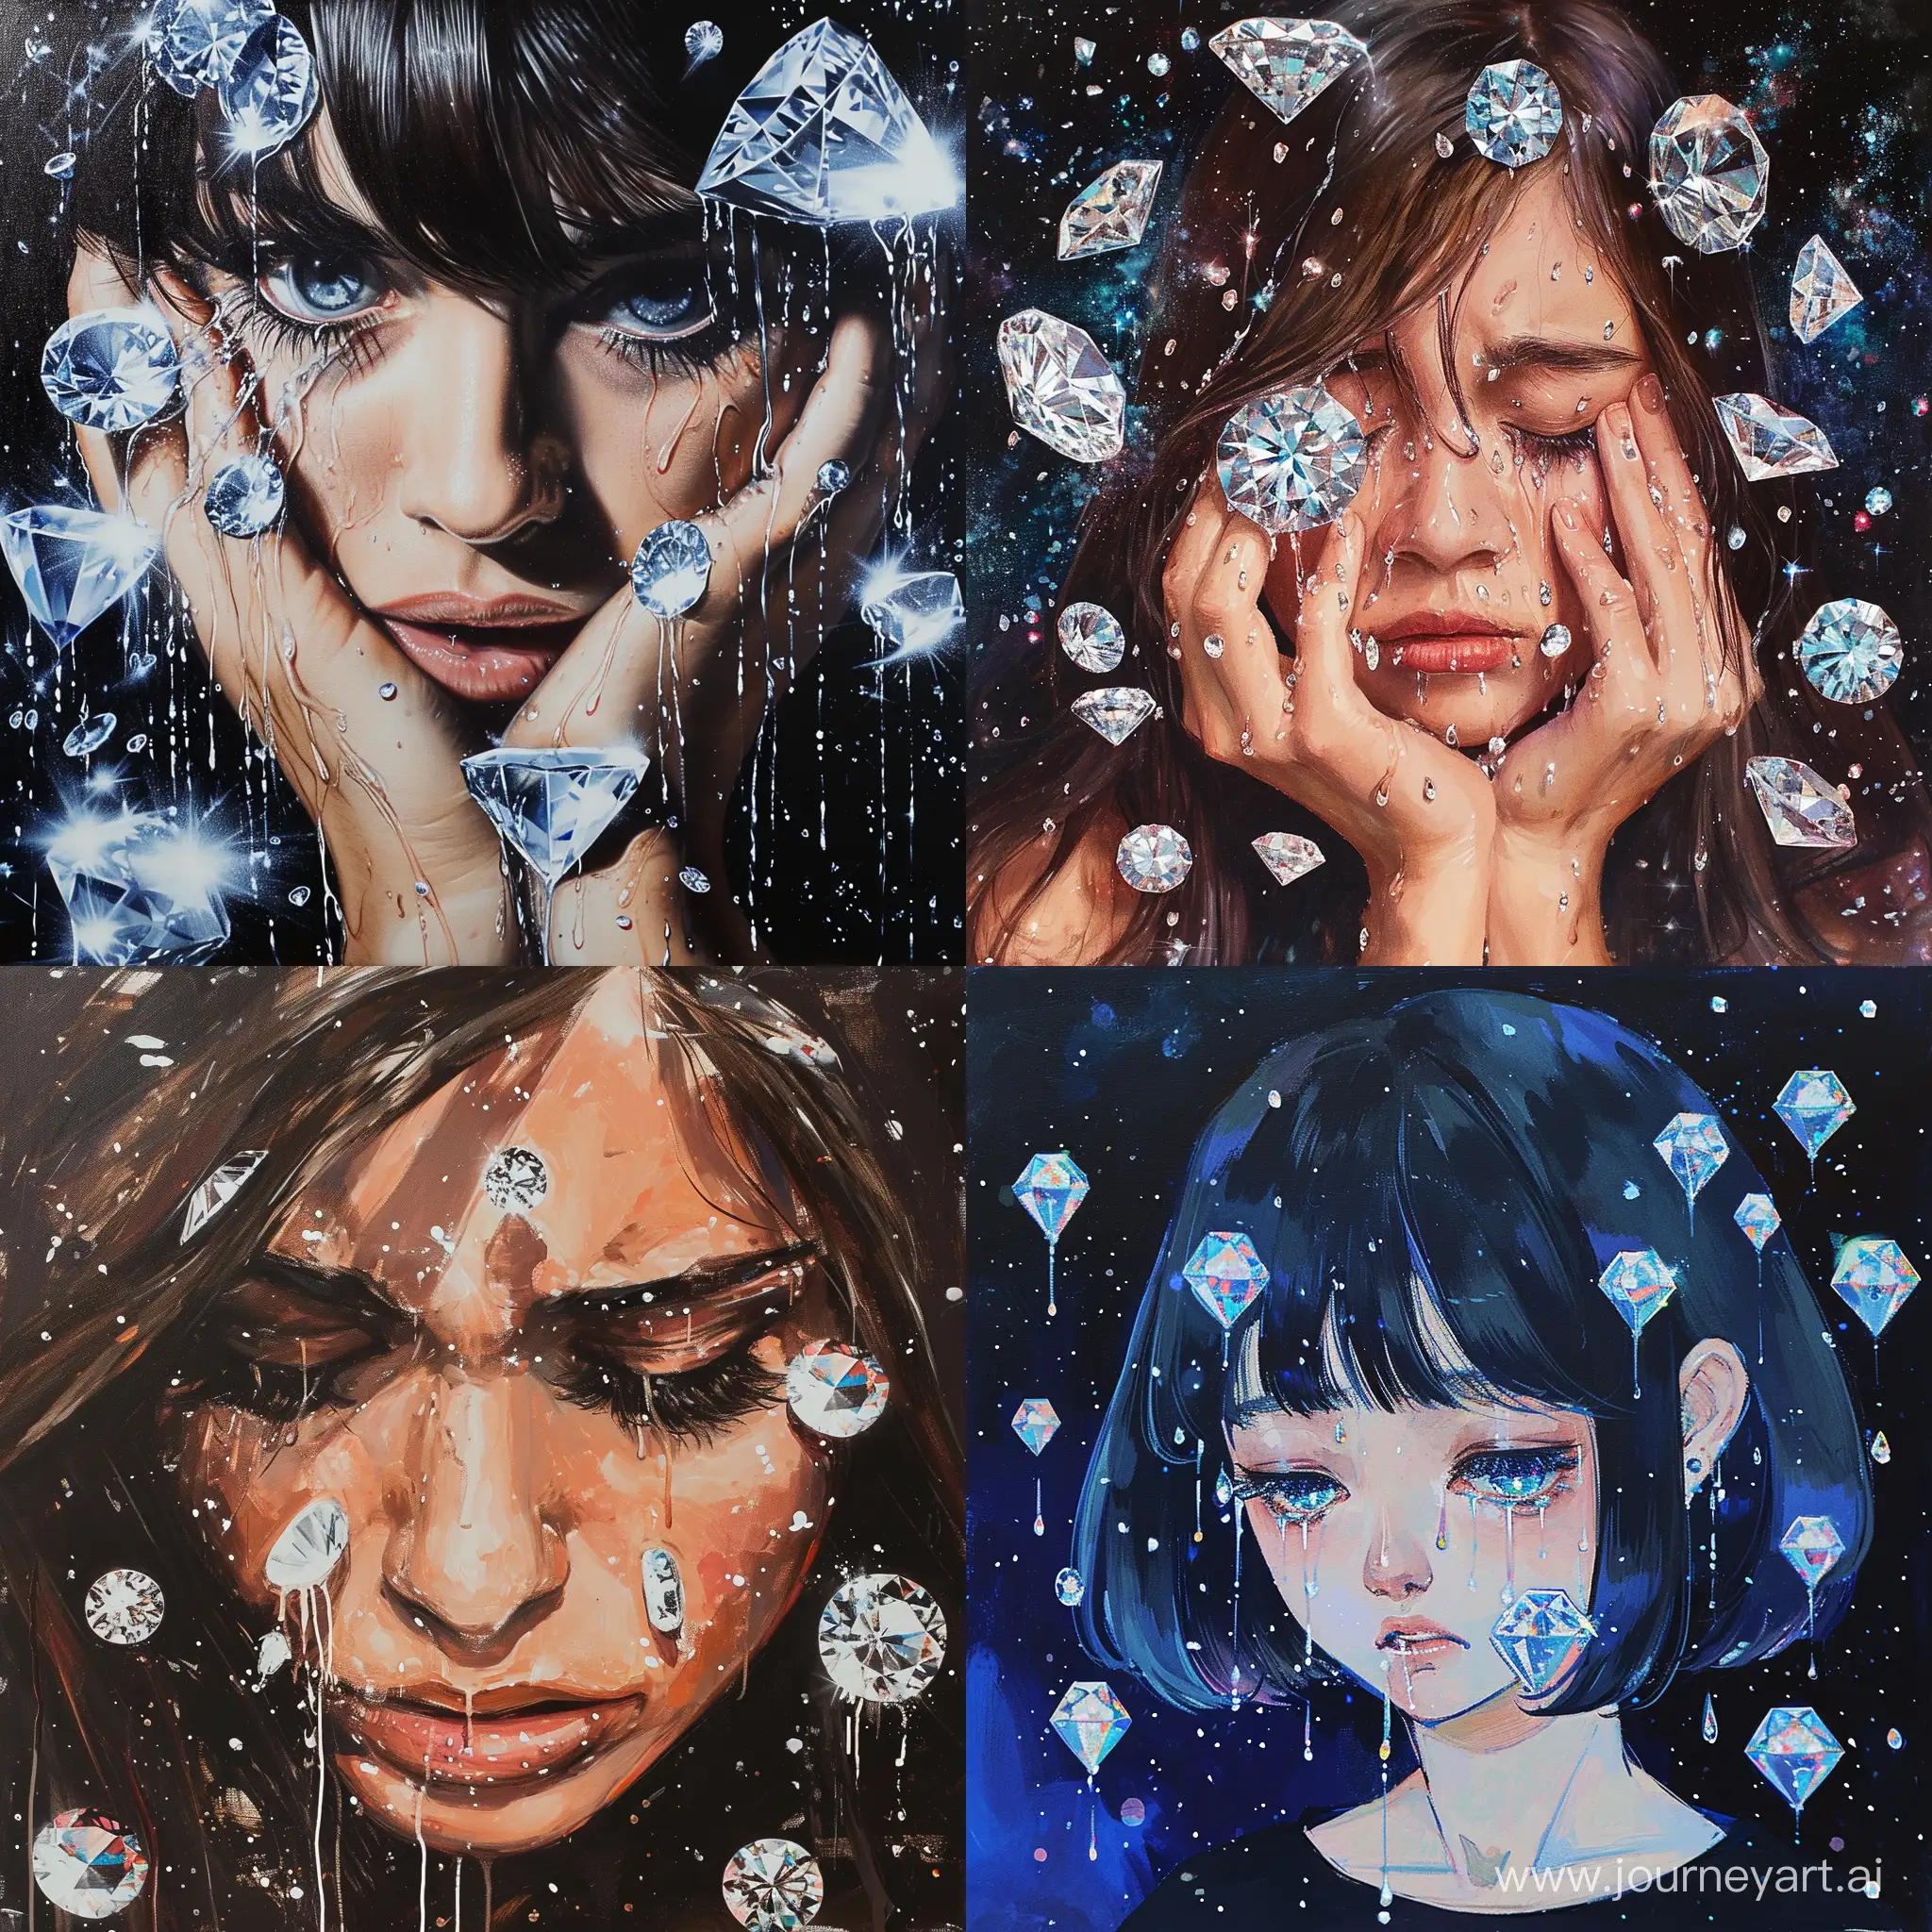 Diamond-Tears-Young-Girl-Crying-in-a-Sparkling-Scene